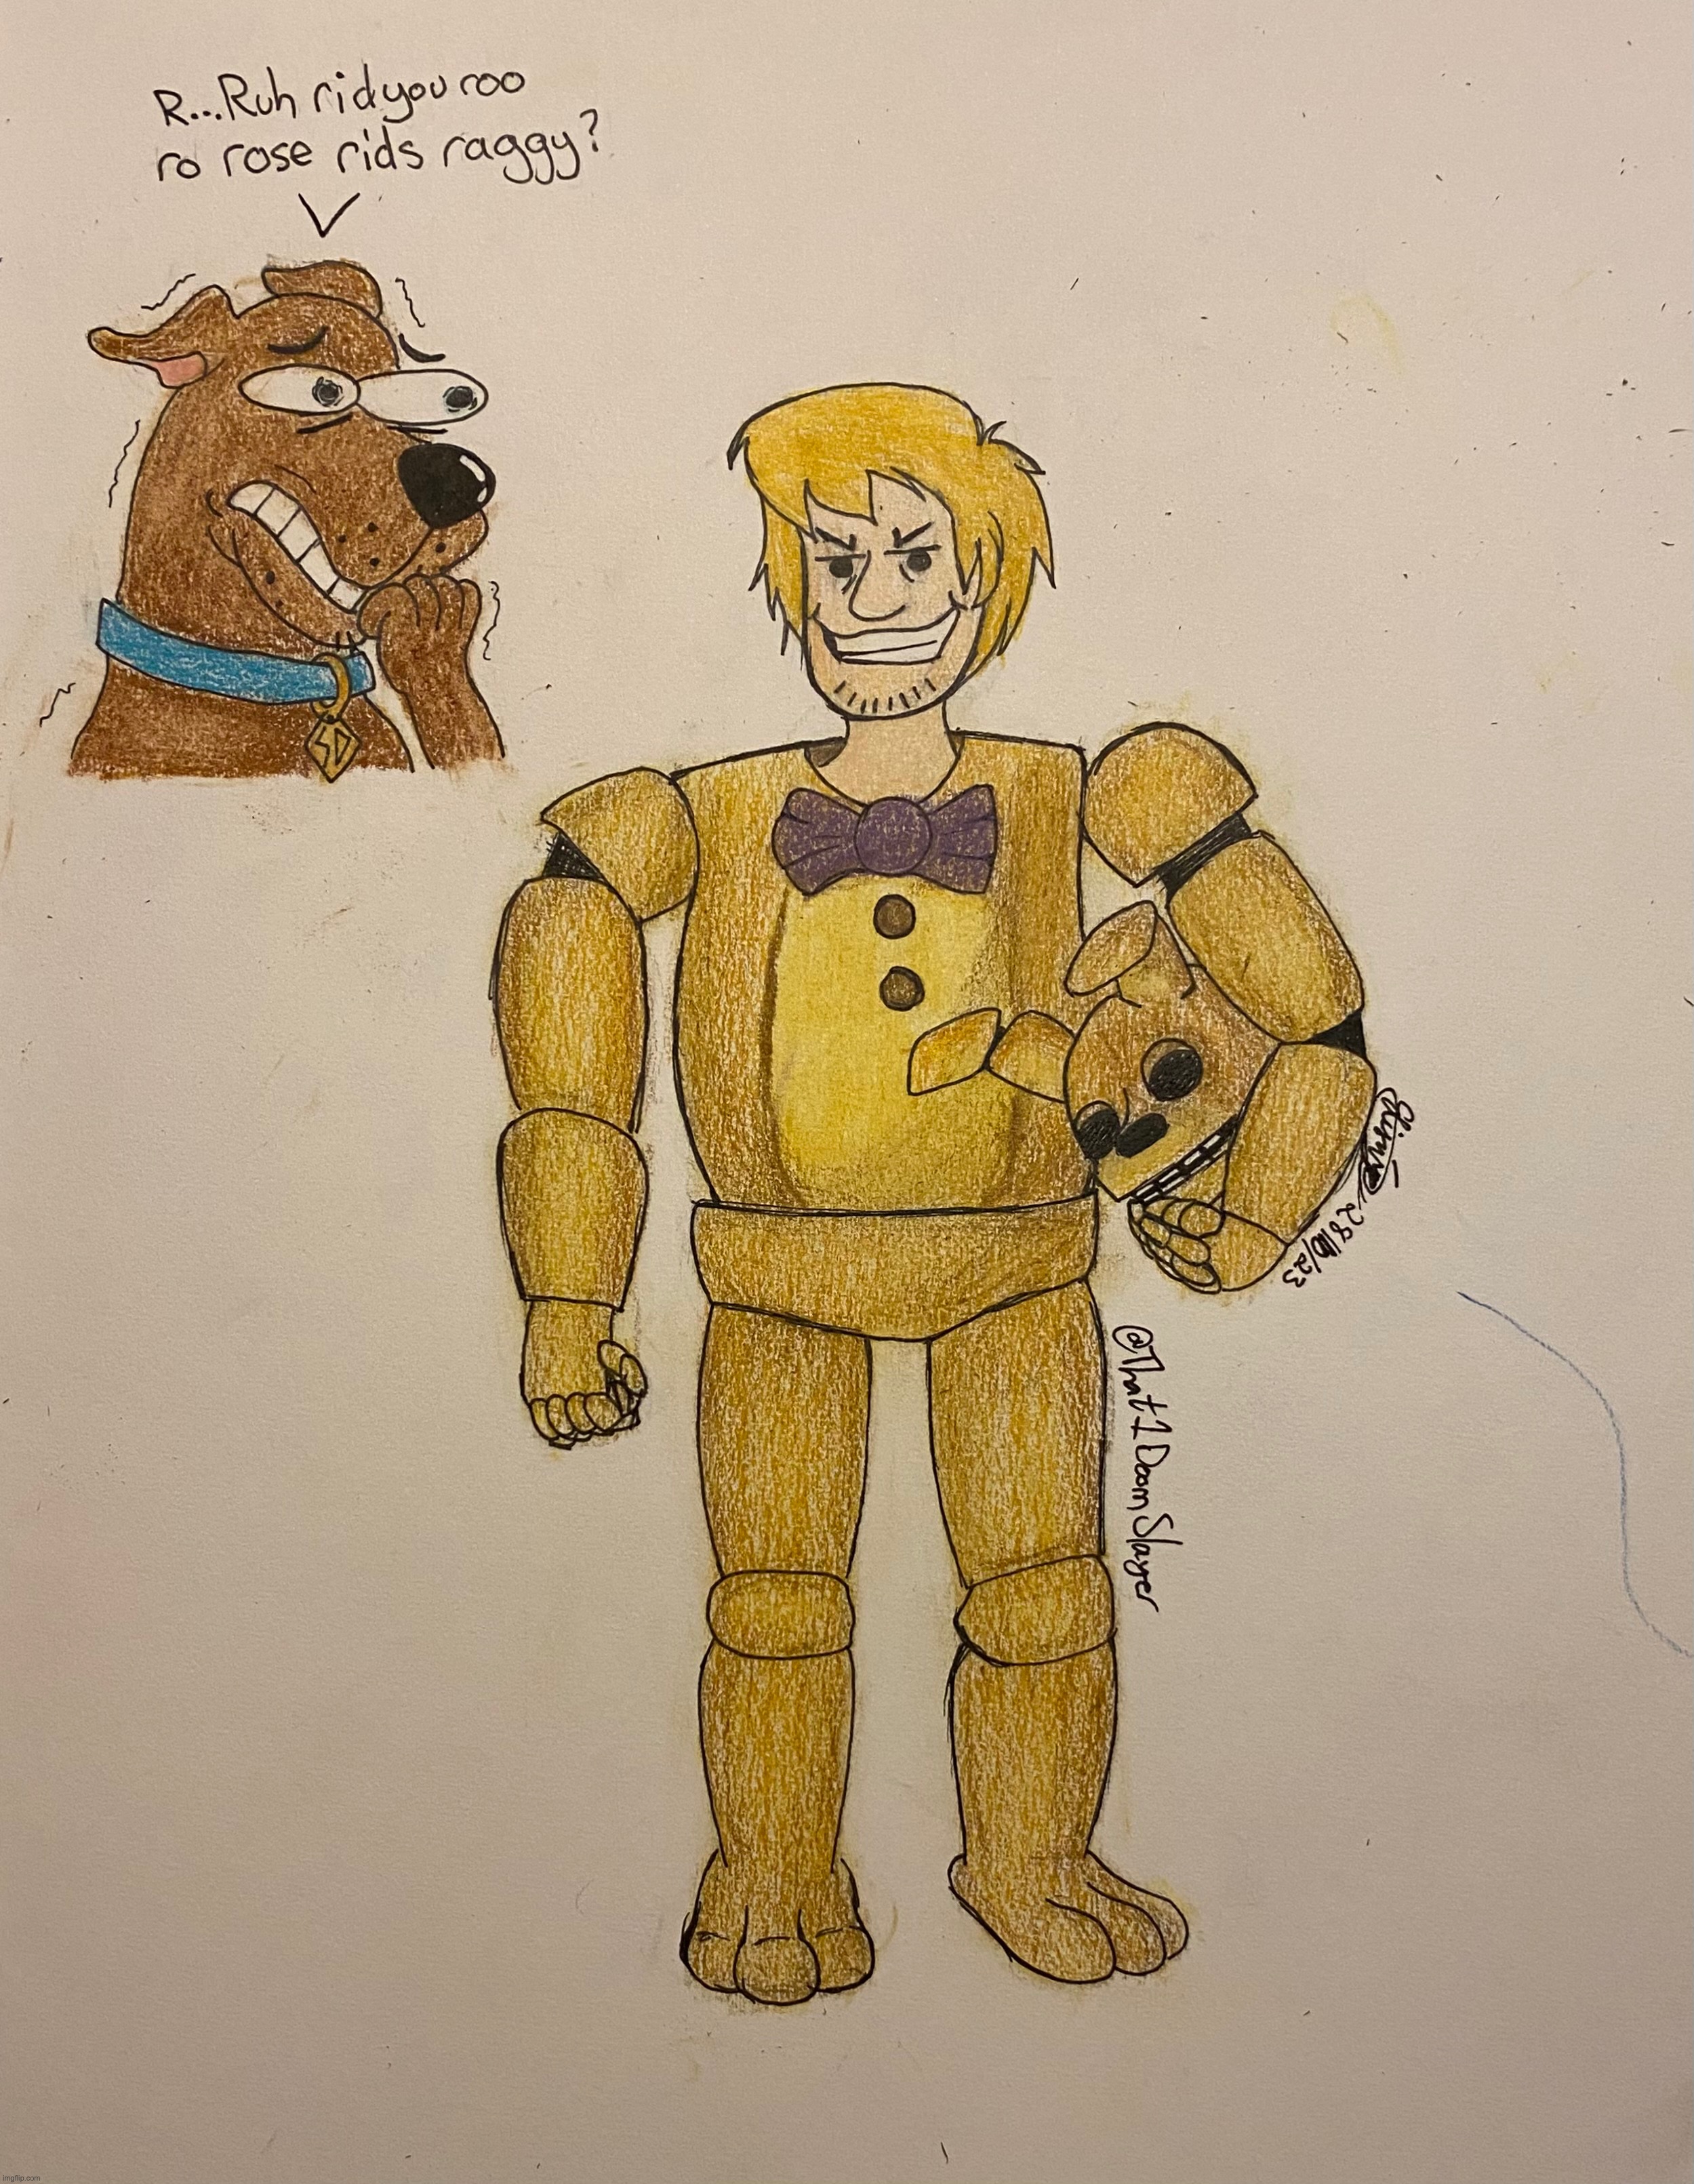 DAMMIT I DIDNT SEE THE ERASER FUZZIES UNTIL NOW AND IM TOO LAZY TO TAKE ANOTHER PICTURE | image tagged in fnaf movie,shaggy,william afton | made w/ Imgflip meme maker